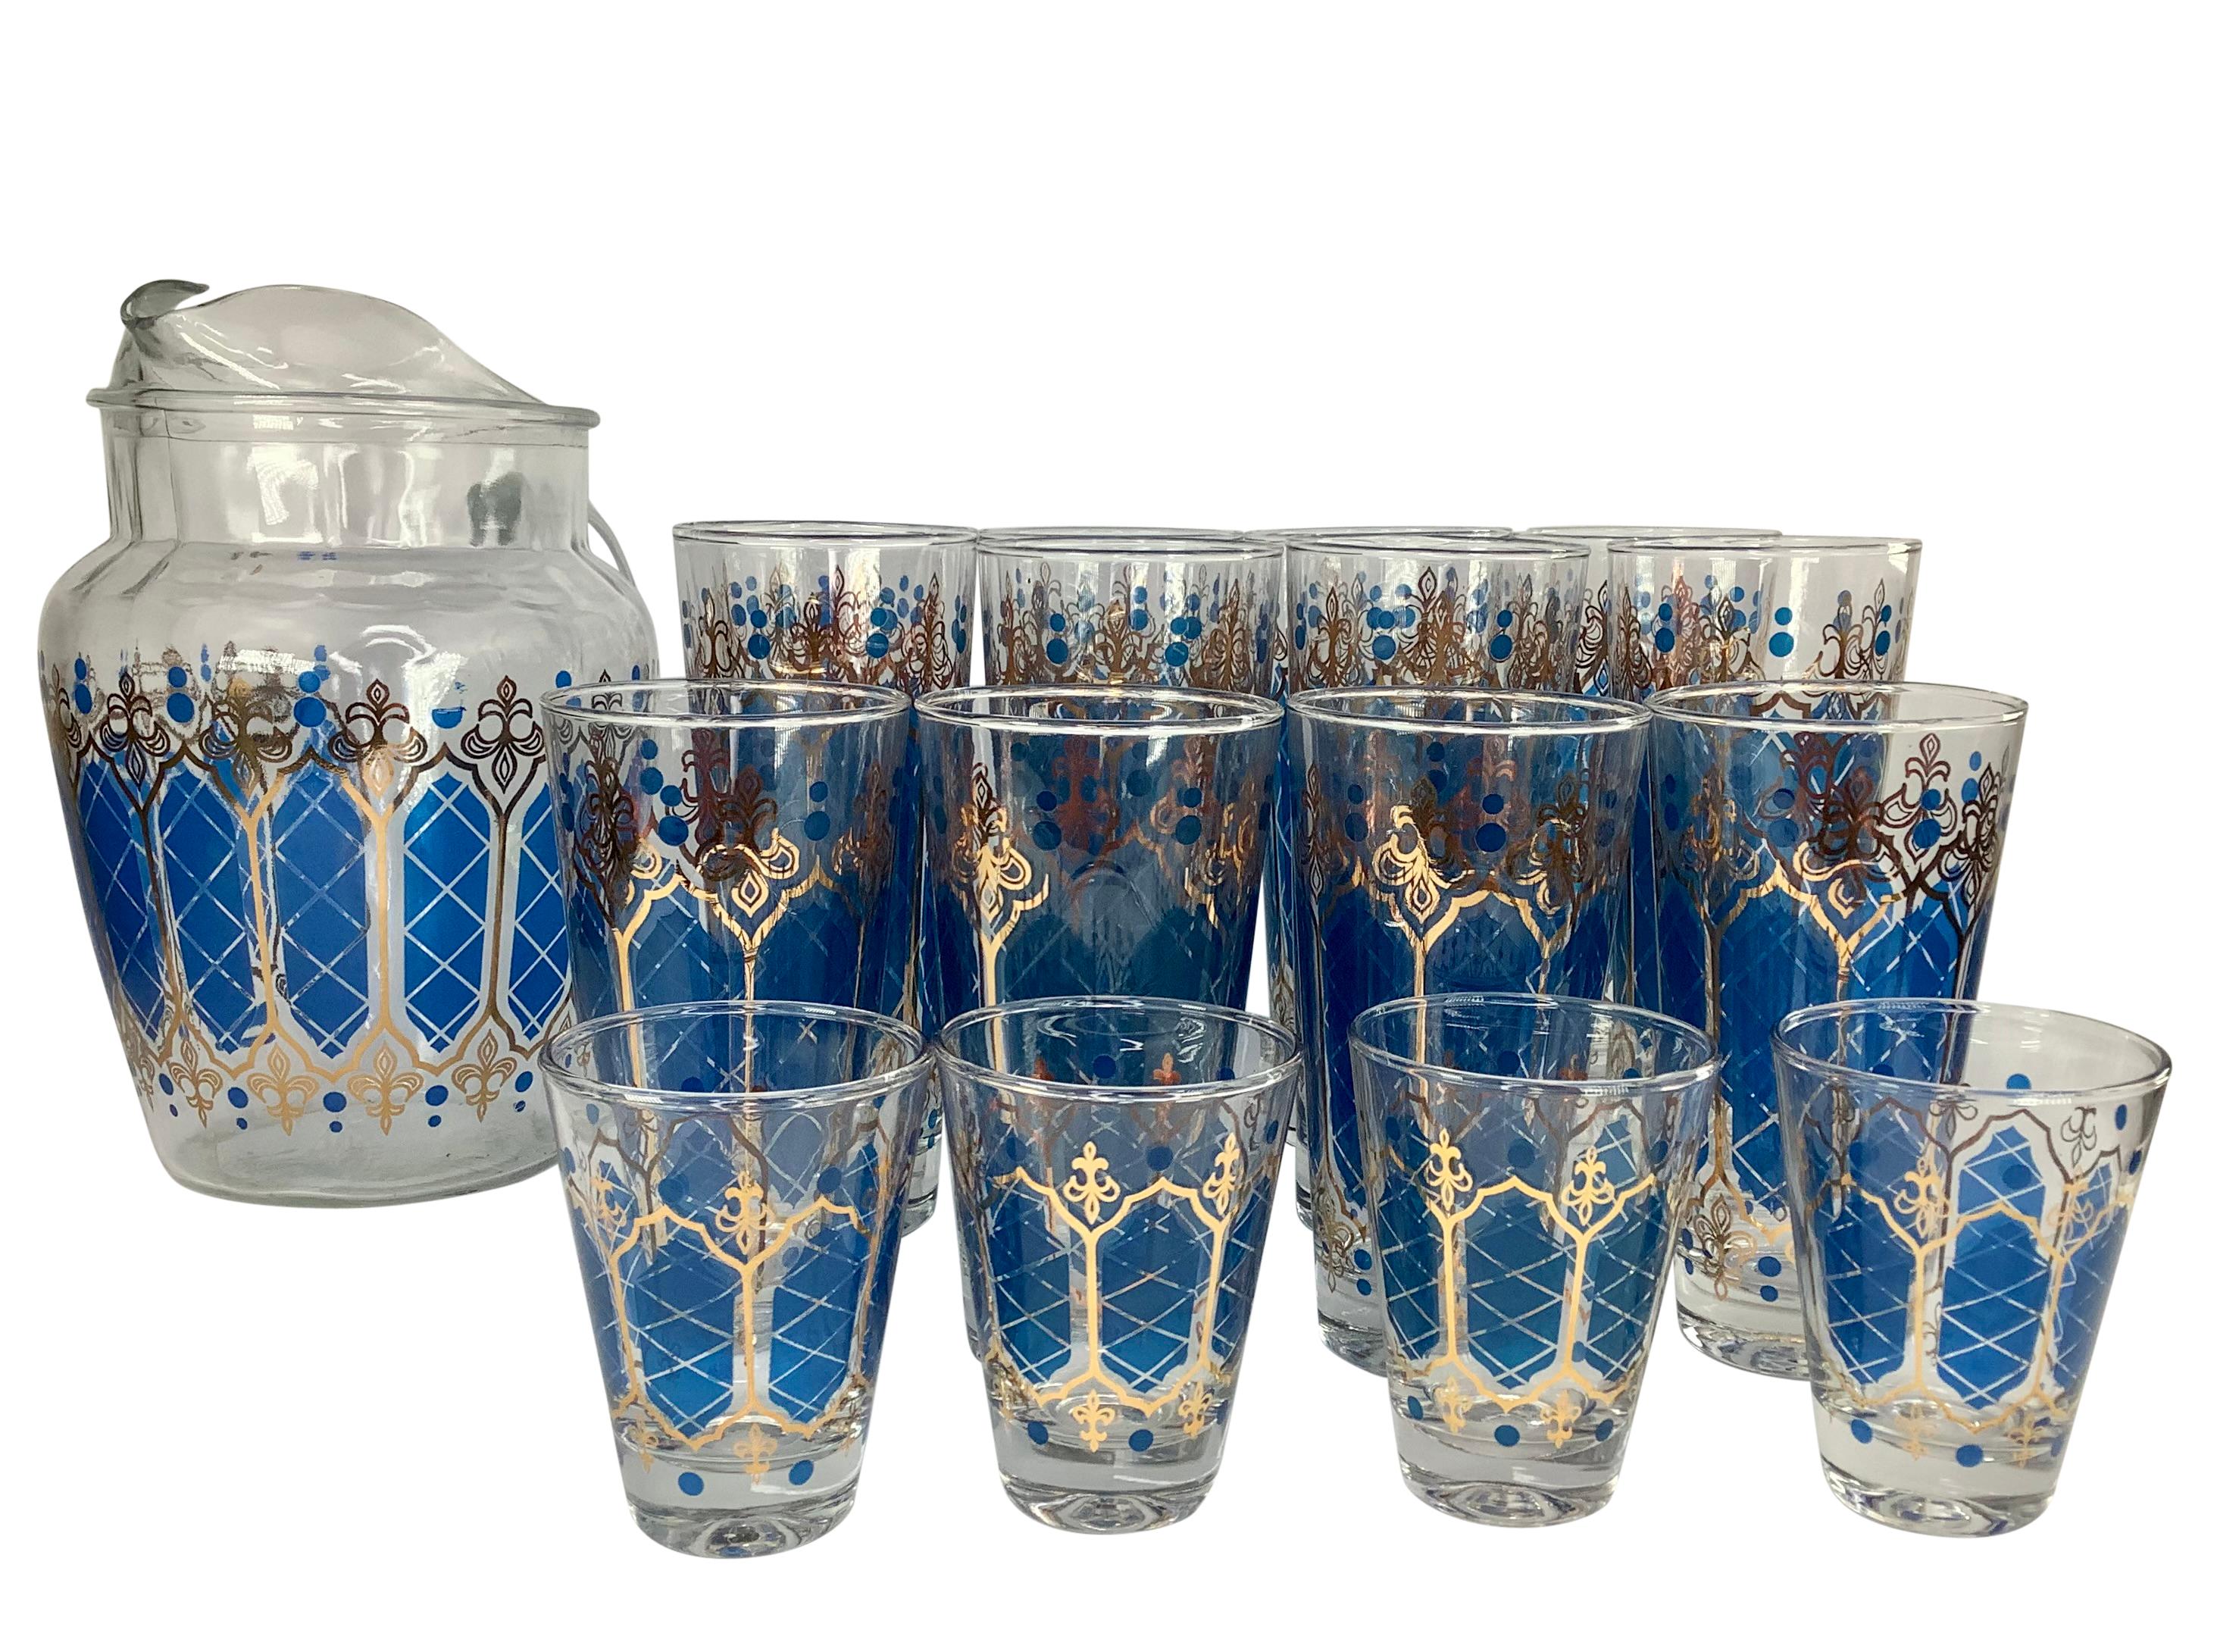 A gorgeous vintage cocktail set consisting of a Pitcher, 8 Tom Collins, 4 Highballs and 4 Old Fashioned in blue diamond pattern accented with 22k gold decoration. All the glasses are slightly tapered
Pitcher 7”w x 8”h
Tom Collins 2 7/8” x 6